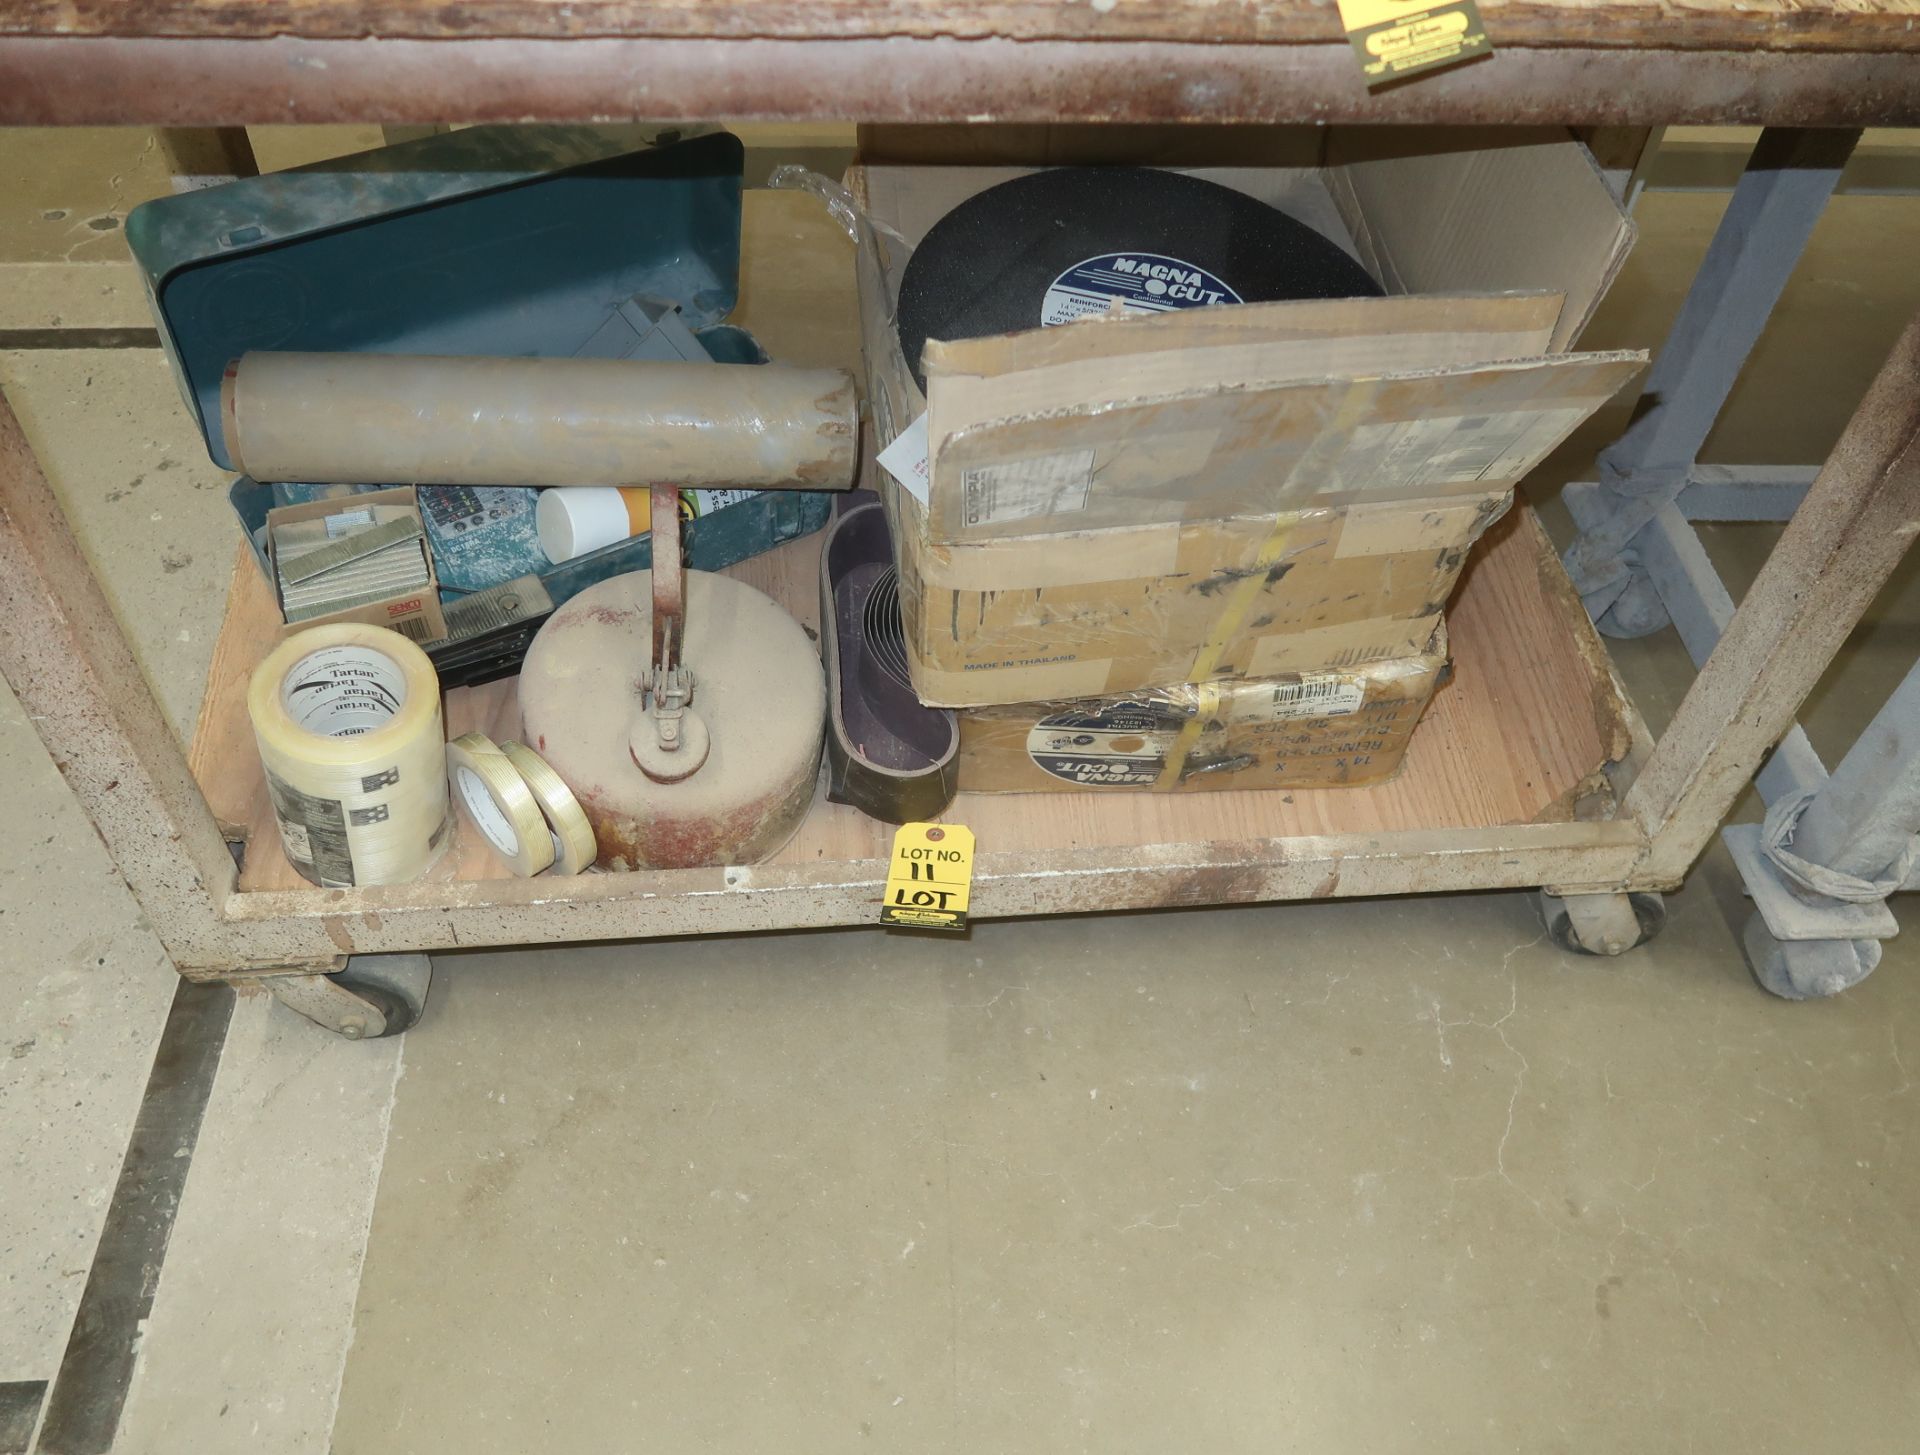 LOT SANDING BELTS, GAS CAN, STRAPPING TAPE, MAKITA CHARGER W/ CASE, 14" X 5/32" X 1" CUTT-OFF